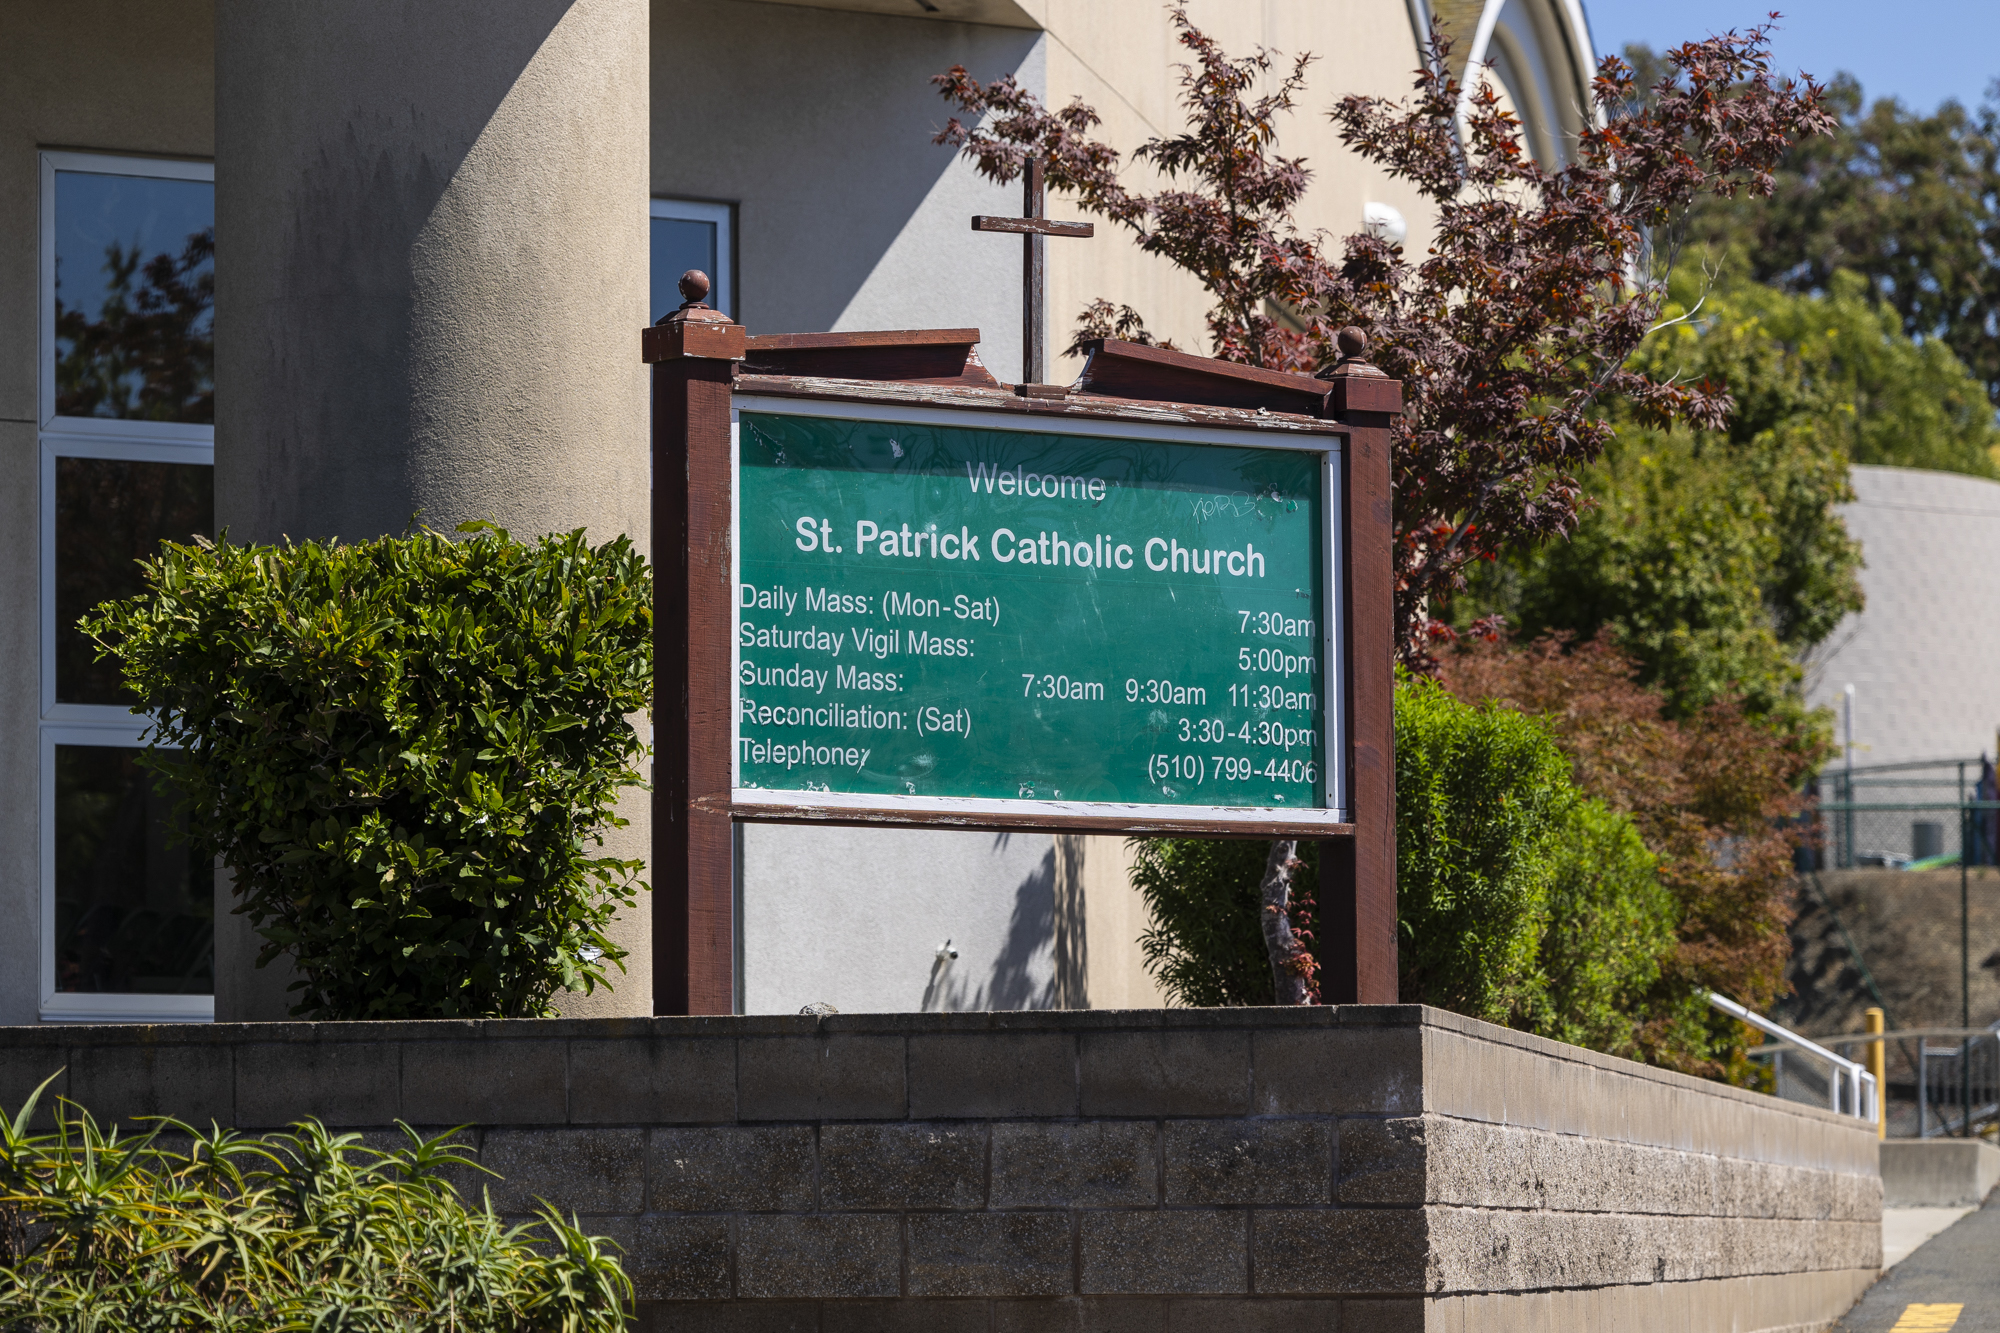 A wooden sign outside a large building that reads "Welcome: St. Patrick Catholic Church" and listing the times of services.